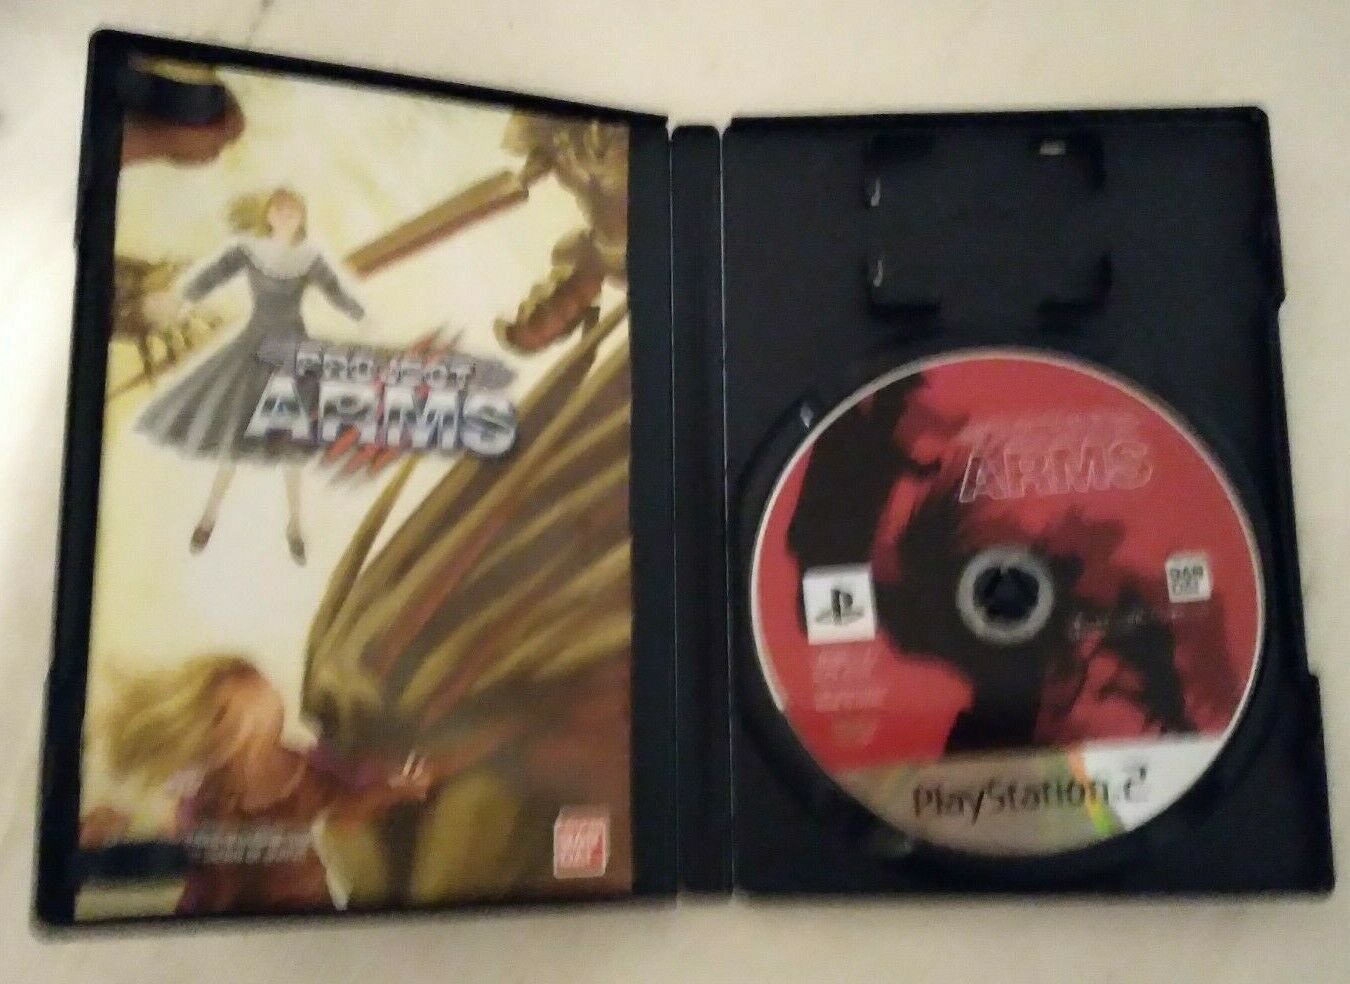 Project Arms Sony Playstation 2 With Manual Japan Import Ps2